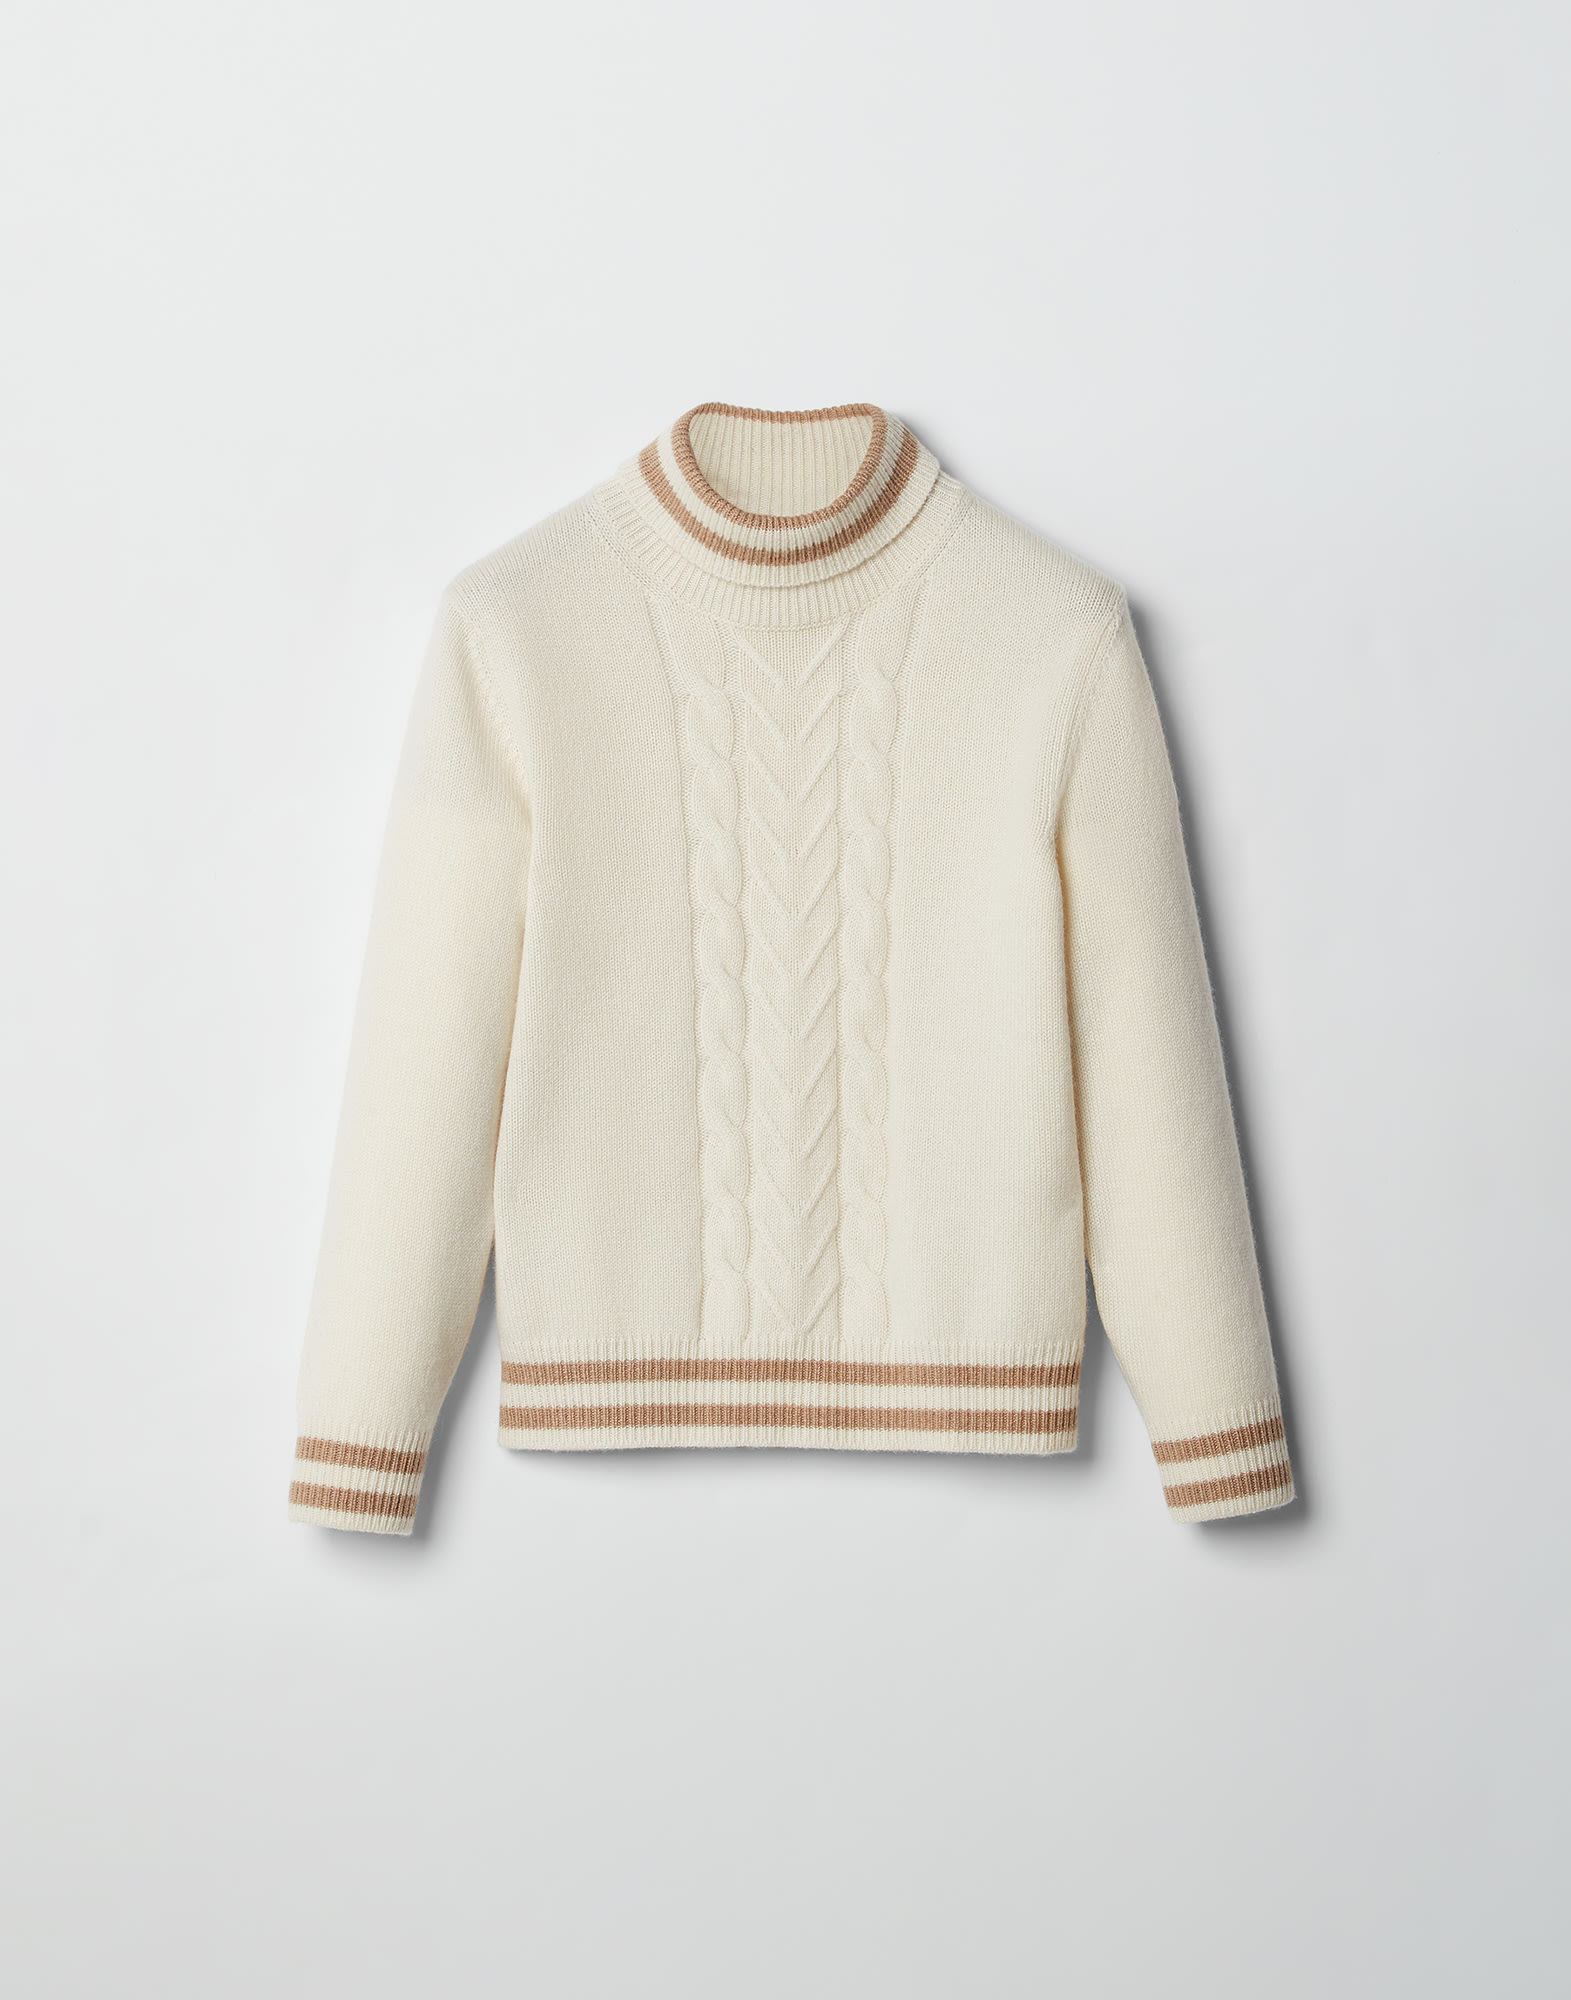 Sweater with striped details Panama Boys - Brunello Cucinelli